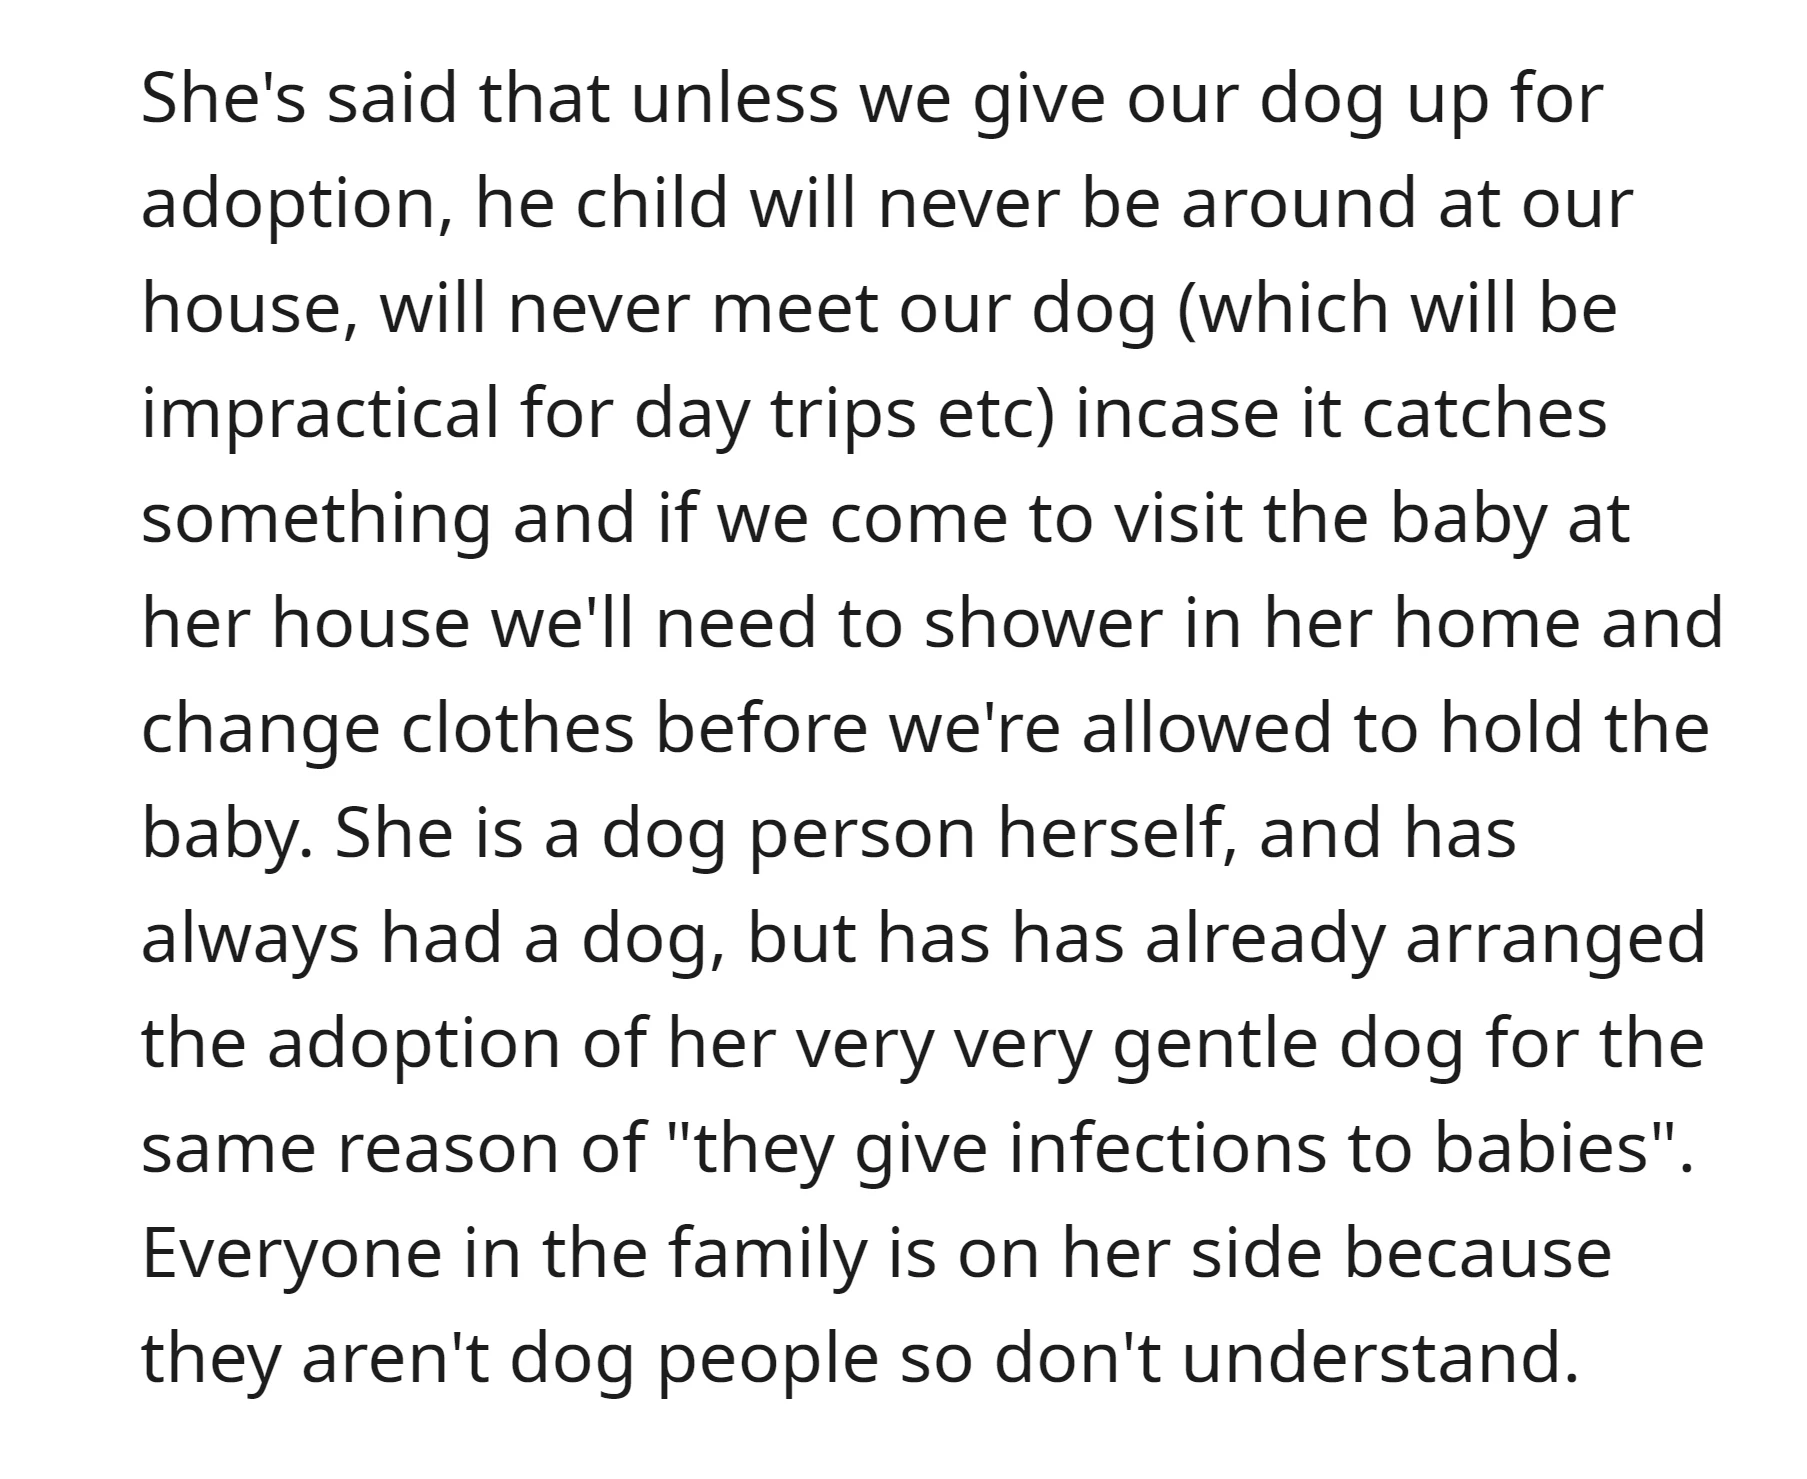 If OP visit the baby at her sister-in-law's house, she must shower and change clothes